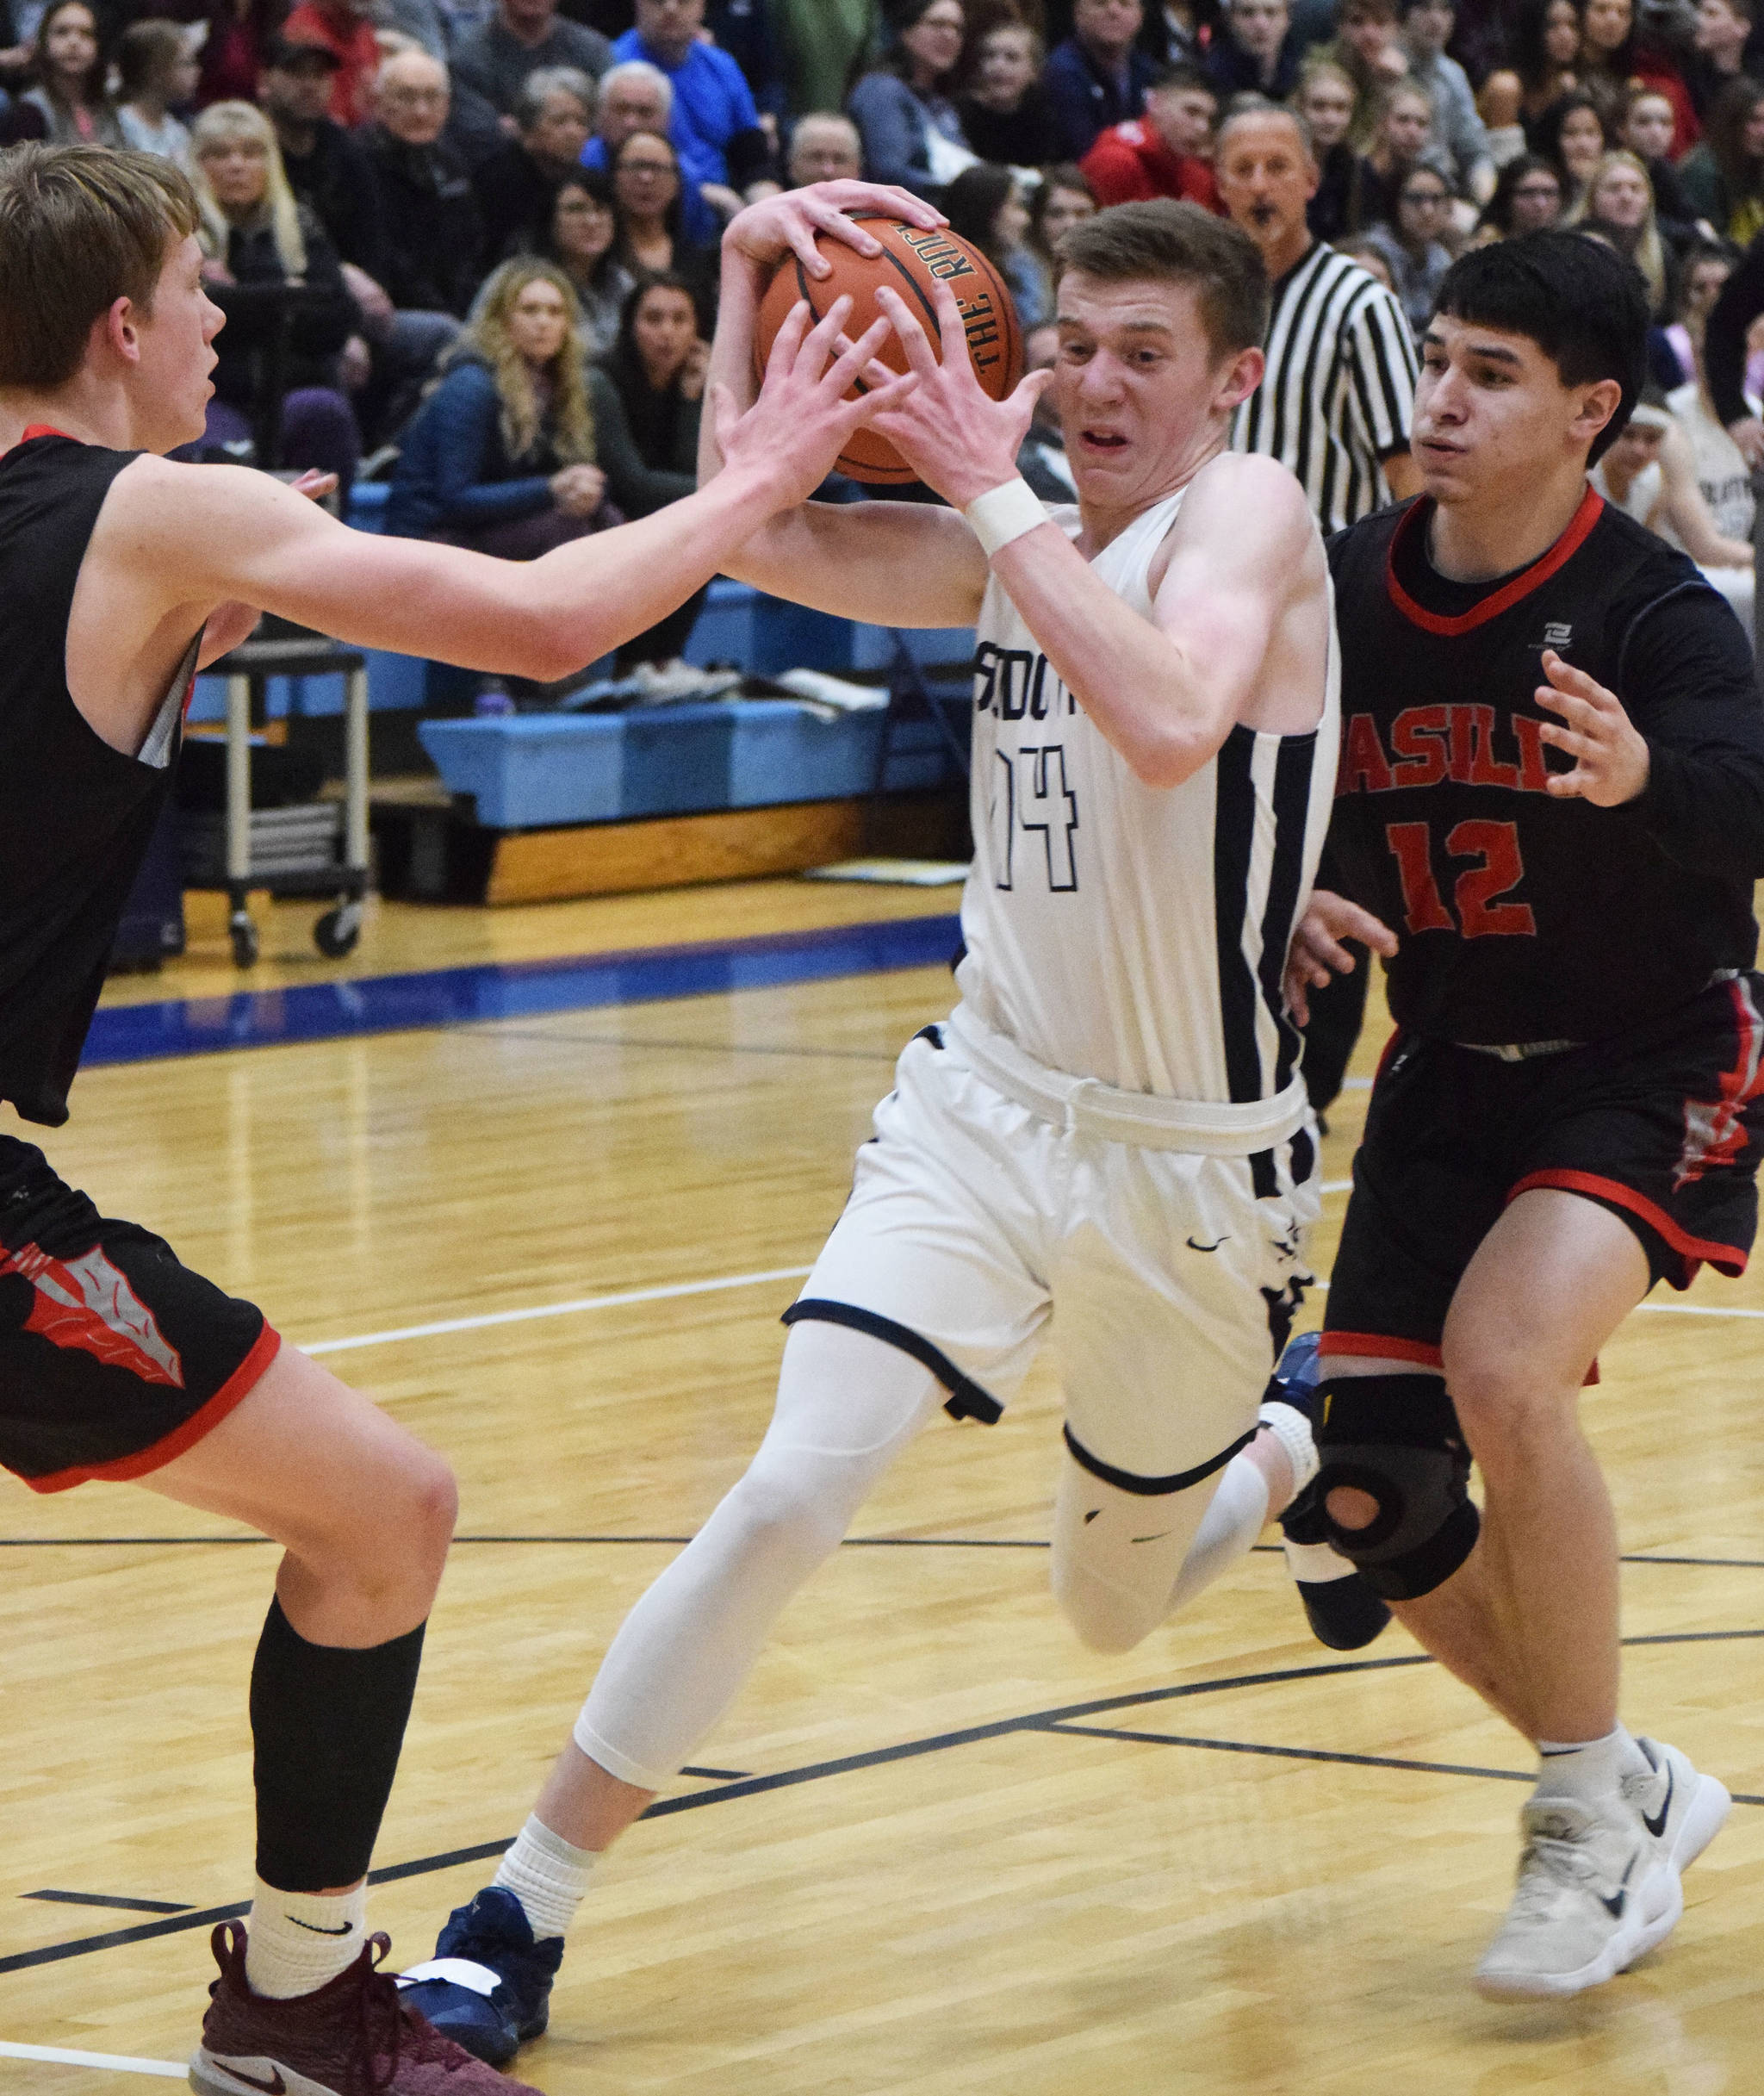 Soldotna’s Ray Chumley (14) drives the lane against Wasilla defenders Andrew Devine (left) and Spencer Koval Friday night in the Northern Lights Conference semifinals at Soldotna High School. (Photo by Joey Klecka/Peninsula Clarion)